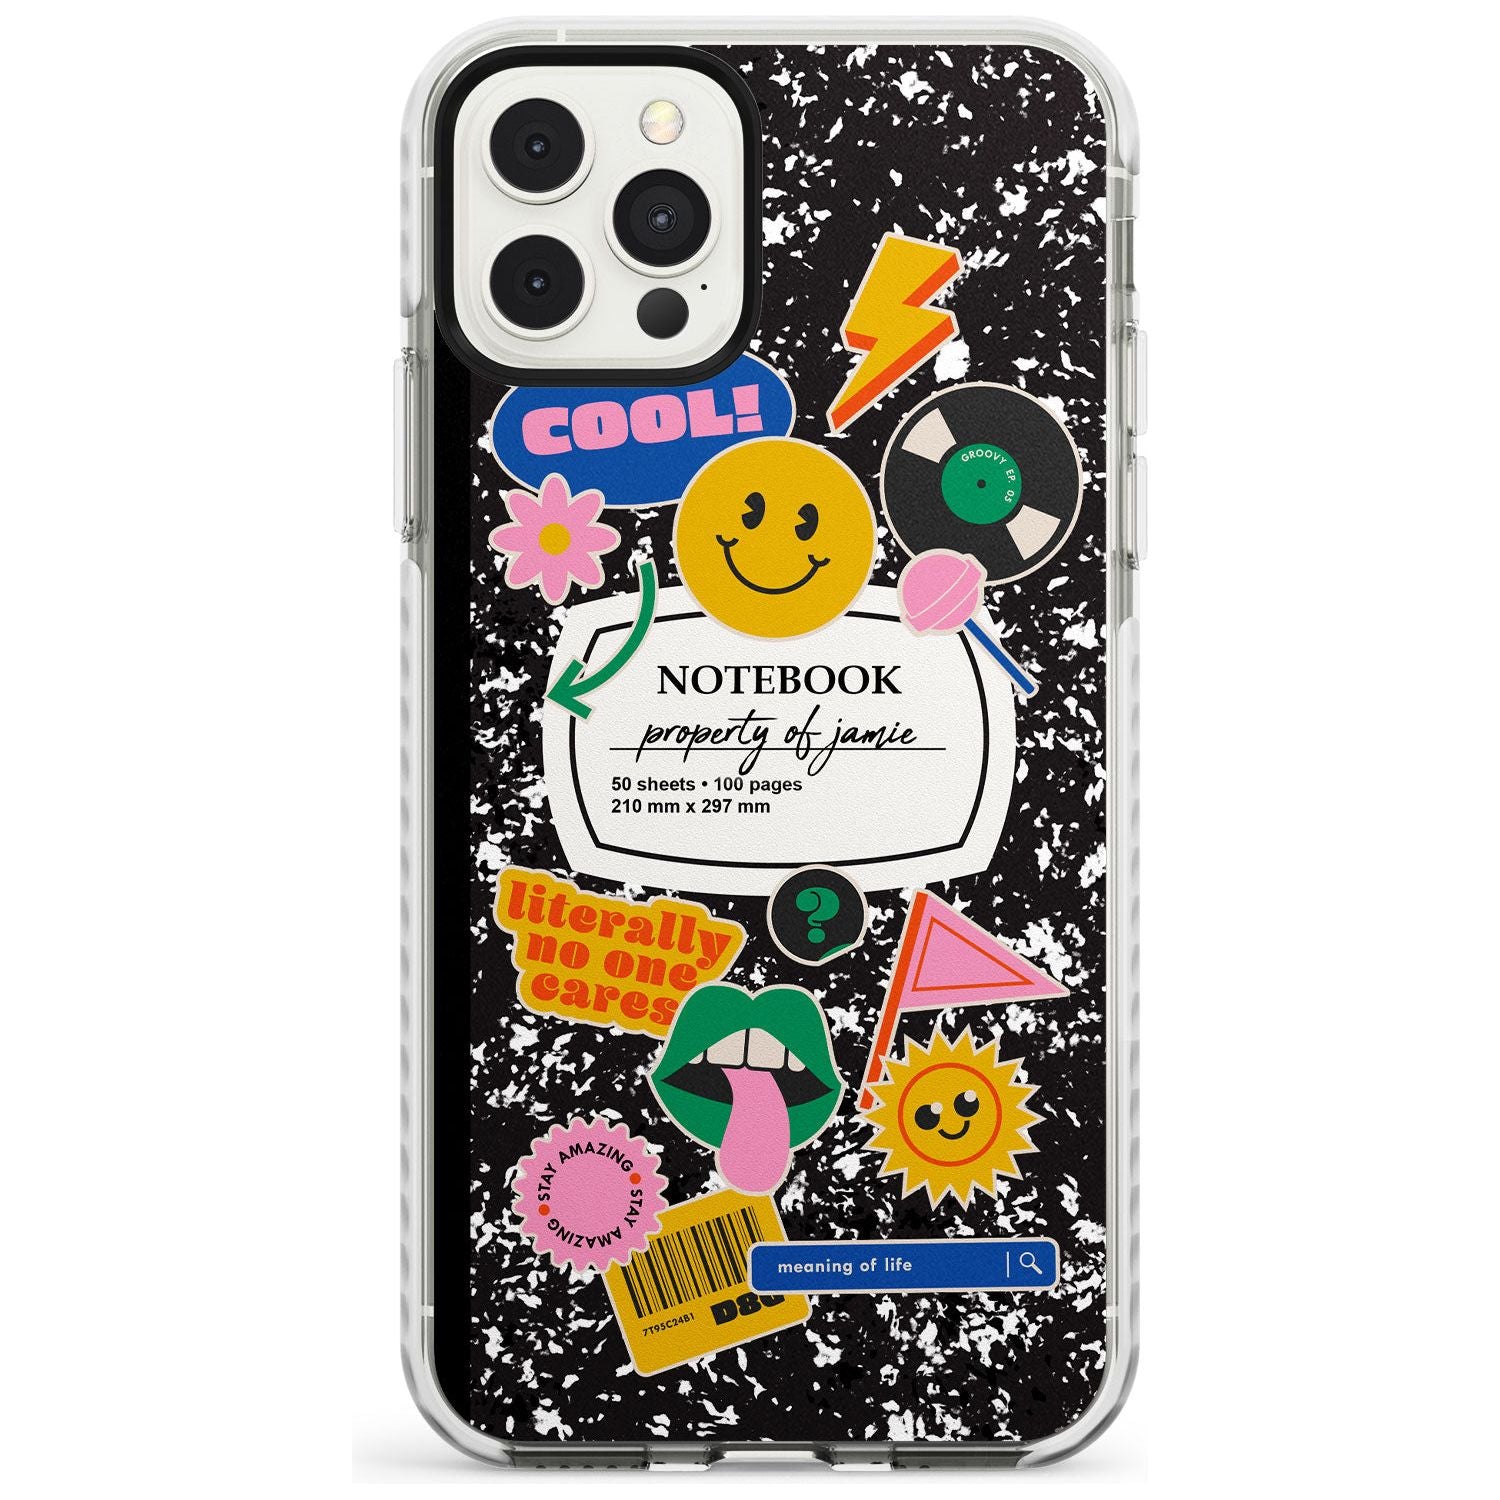 Custom Notebook Cover with Stickers Slim TPU Phone Case for iPhone 11 Pro Max